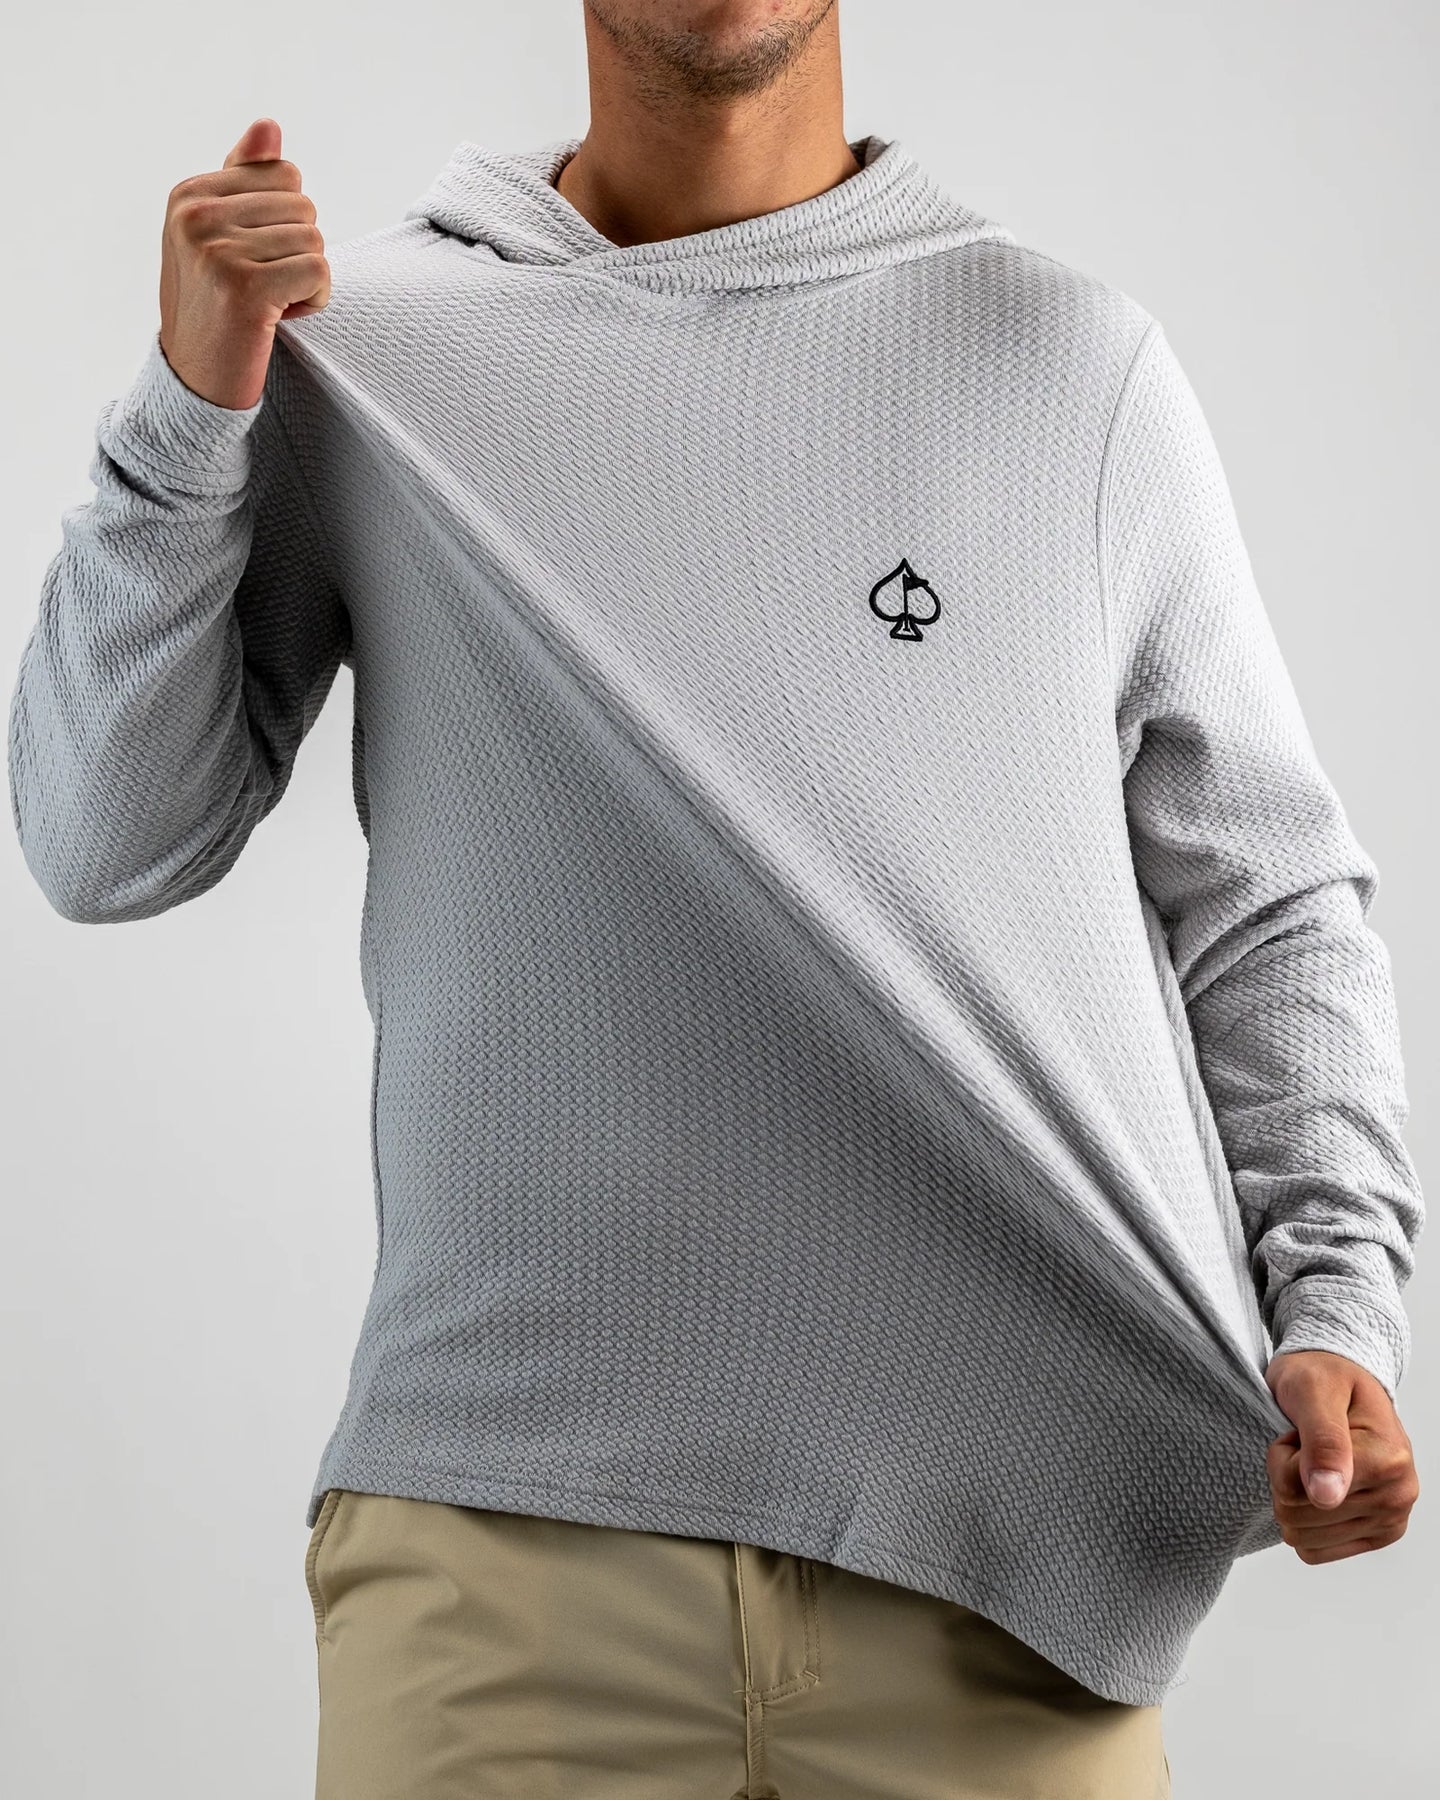 Player Preferred™ Waffle Knit Hoodie - StonePins & Aces SEPlayer Preferred™ Waffle Knit Hoodie - Stone